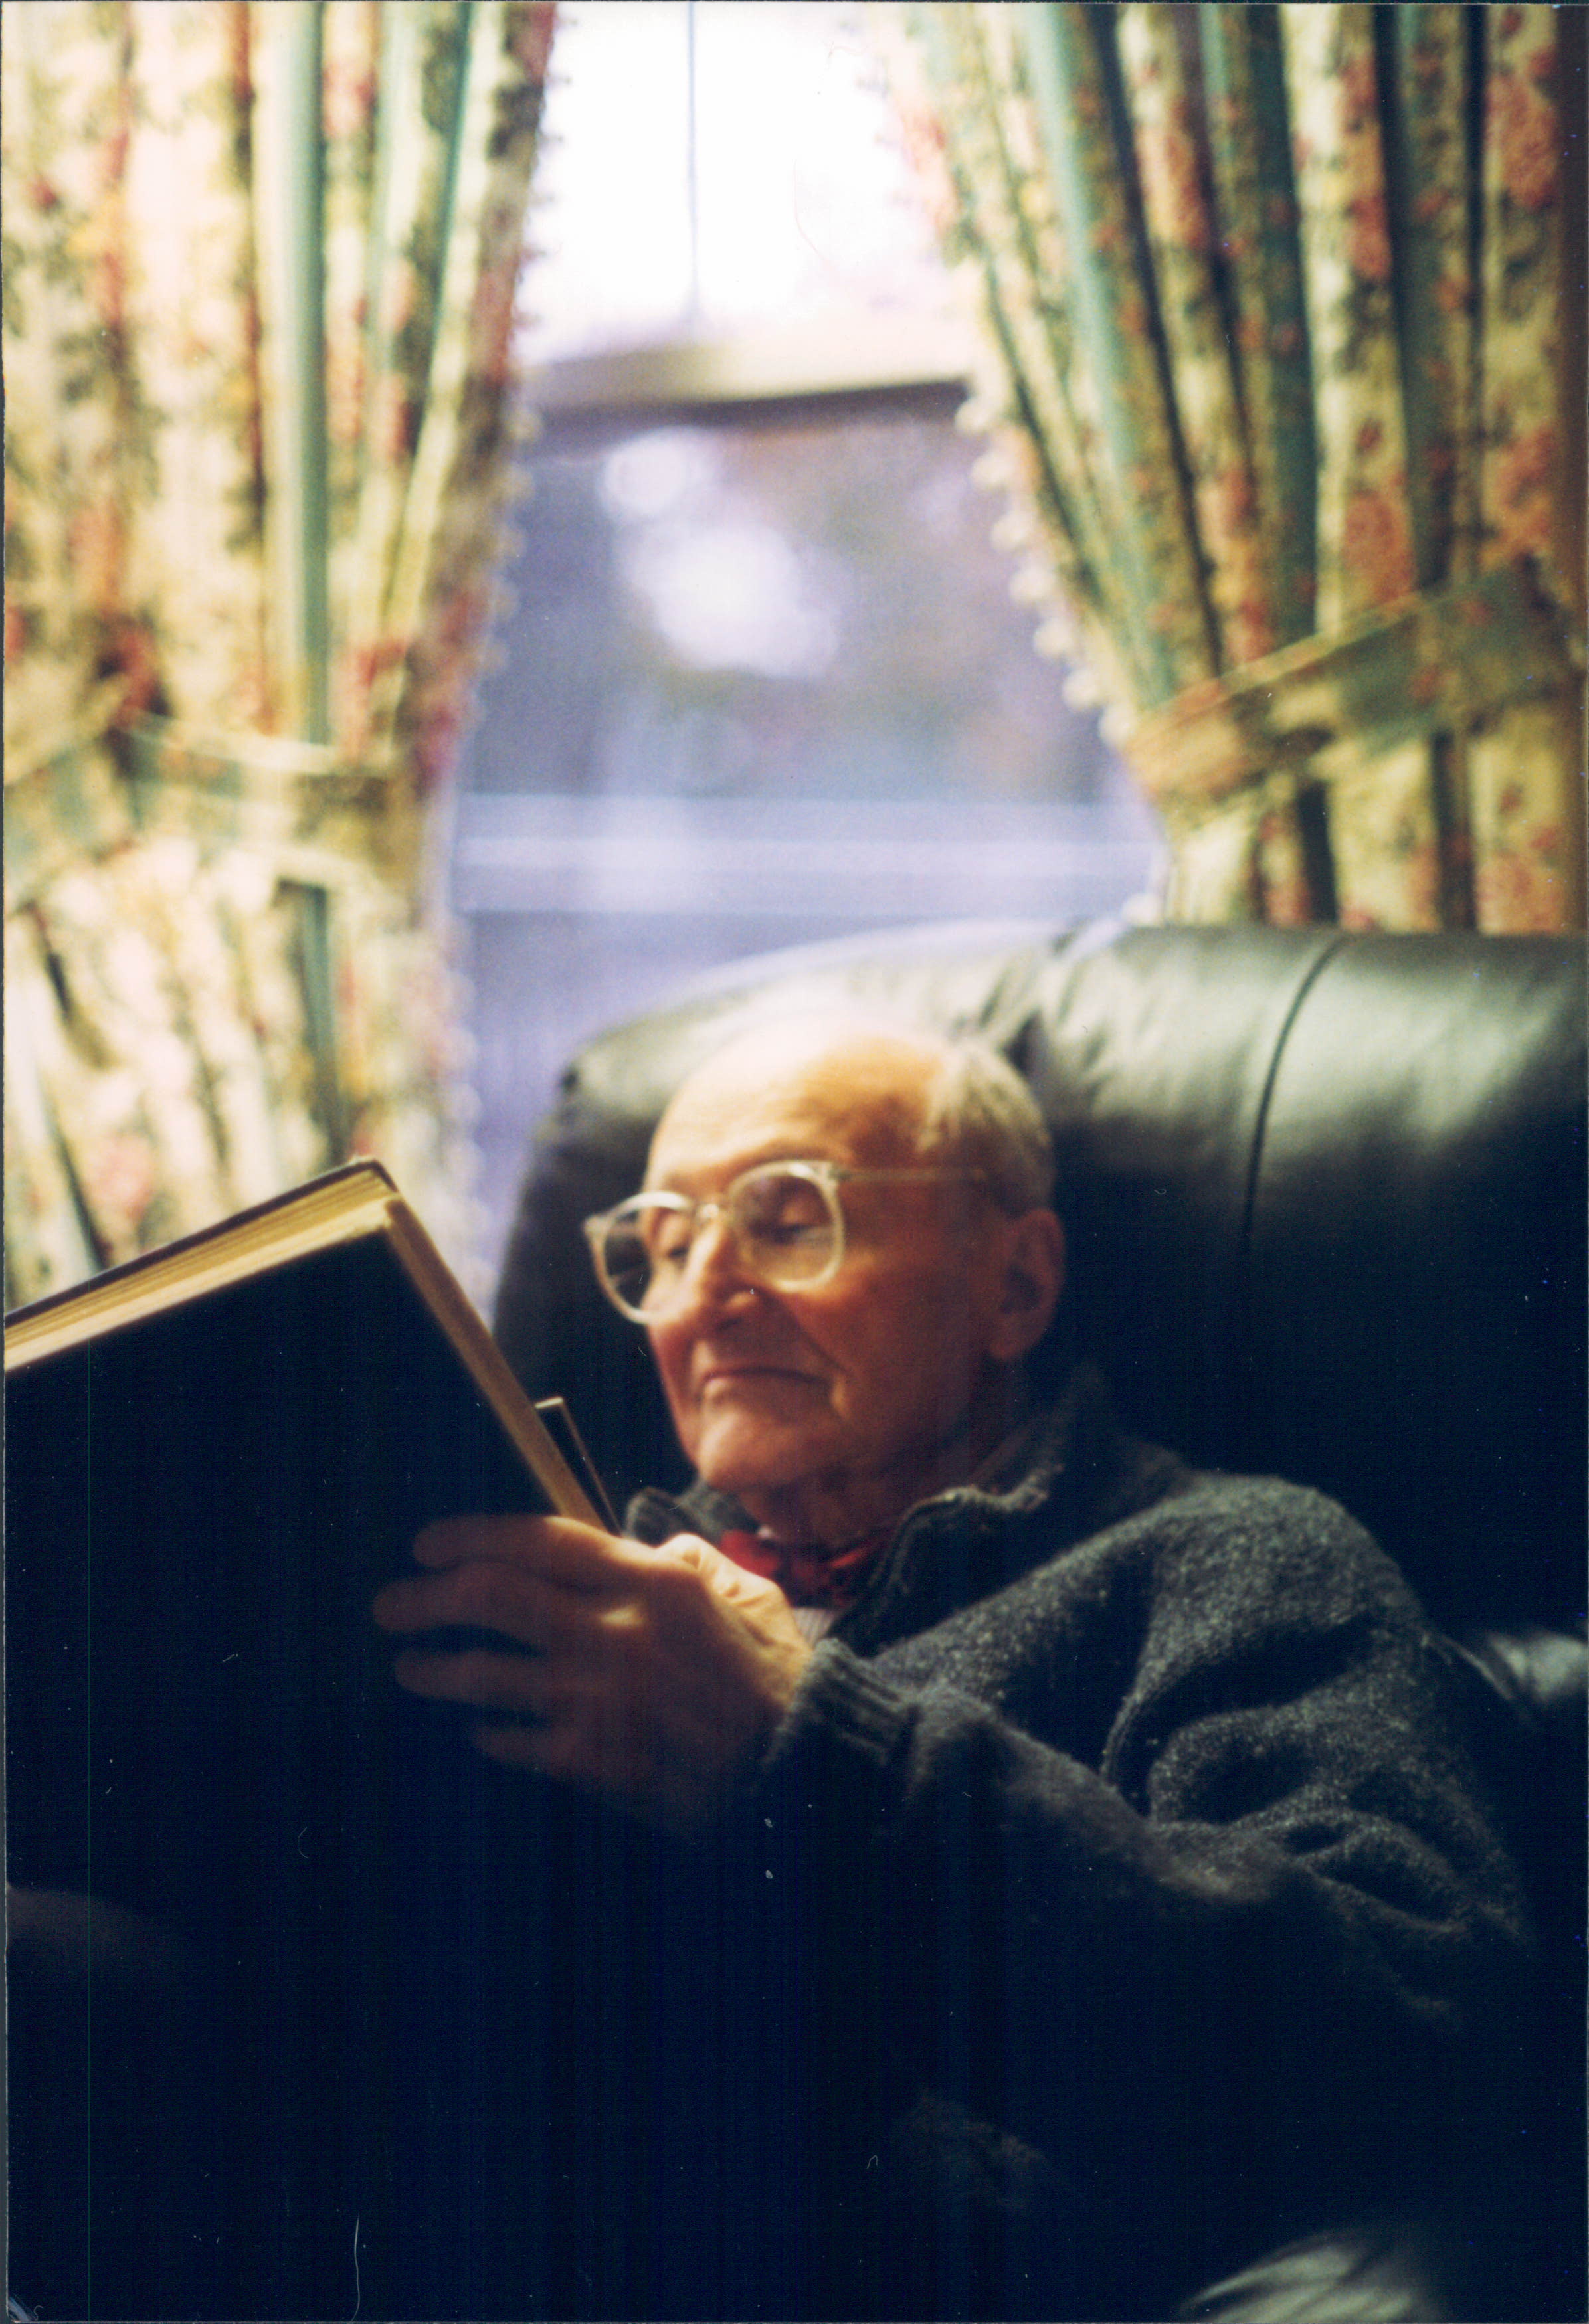 Older man reading in a comfortable chair.